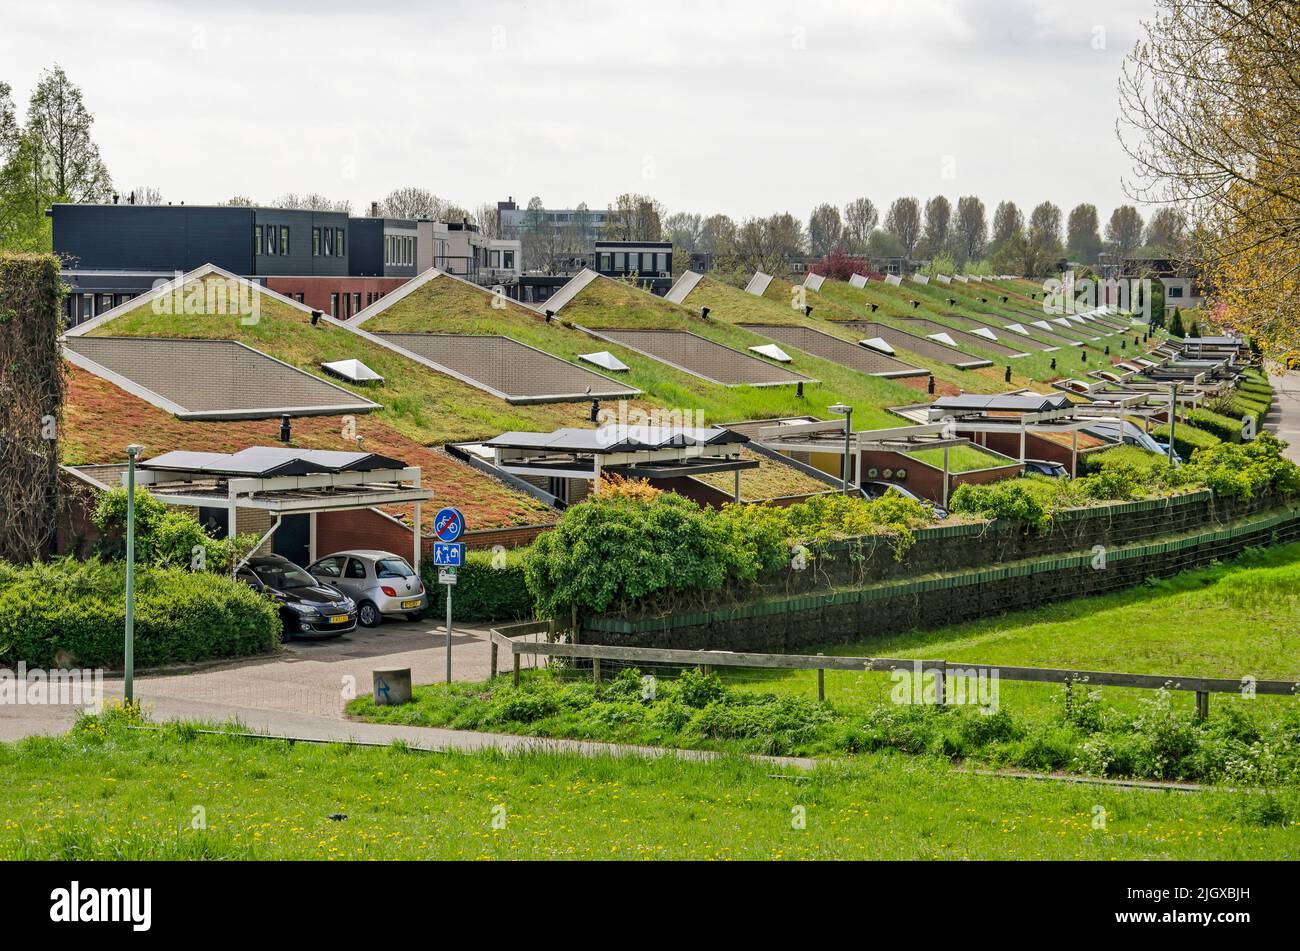 Dordrecht, The Netherlands, April 15, 2022: row of modern patio houses with vegetated roofs and solar panels Stock Photo